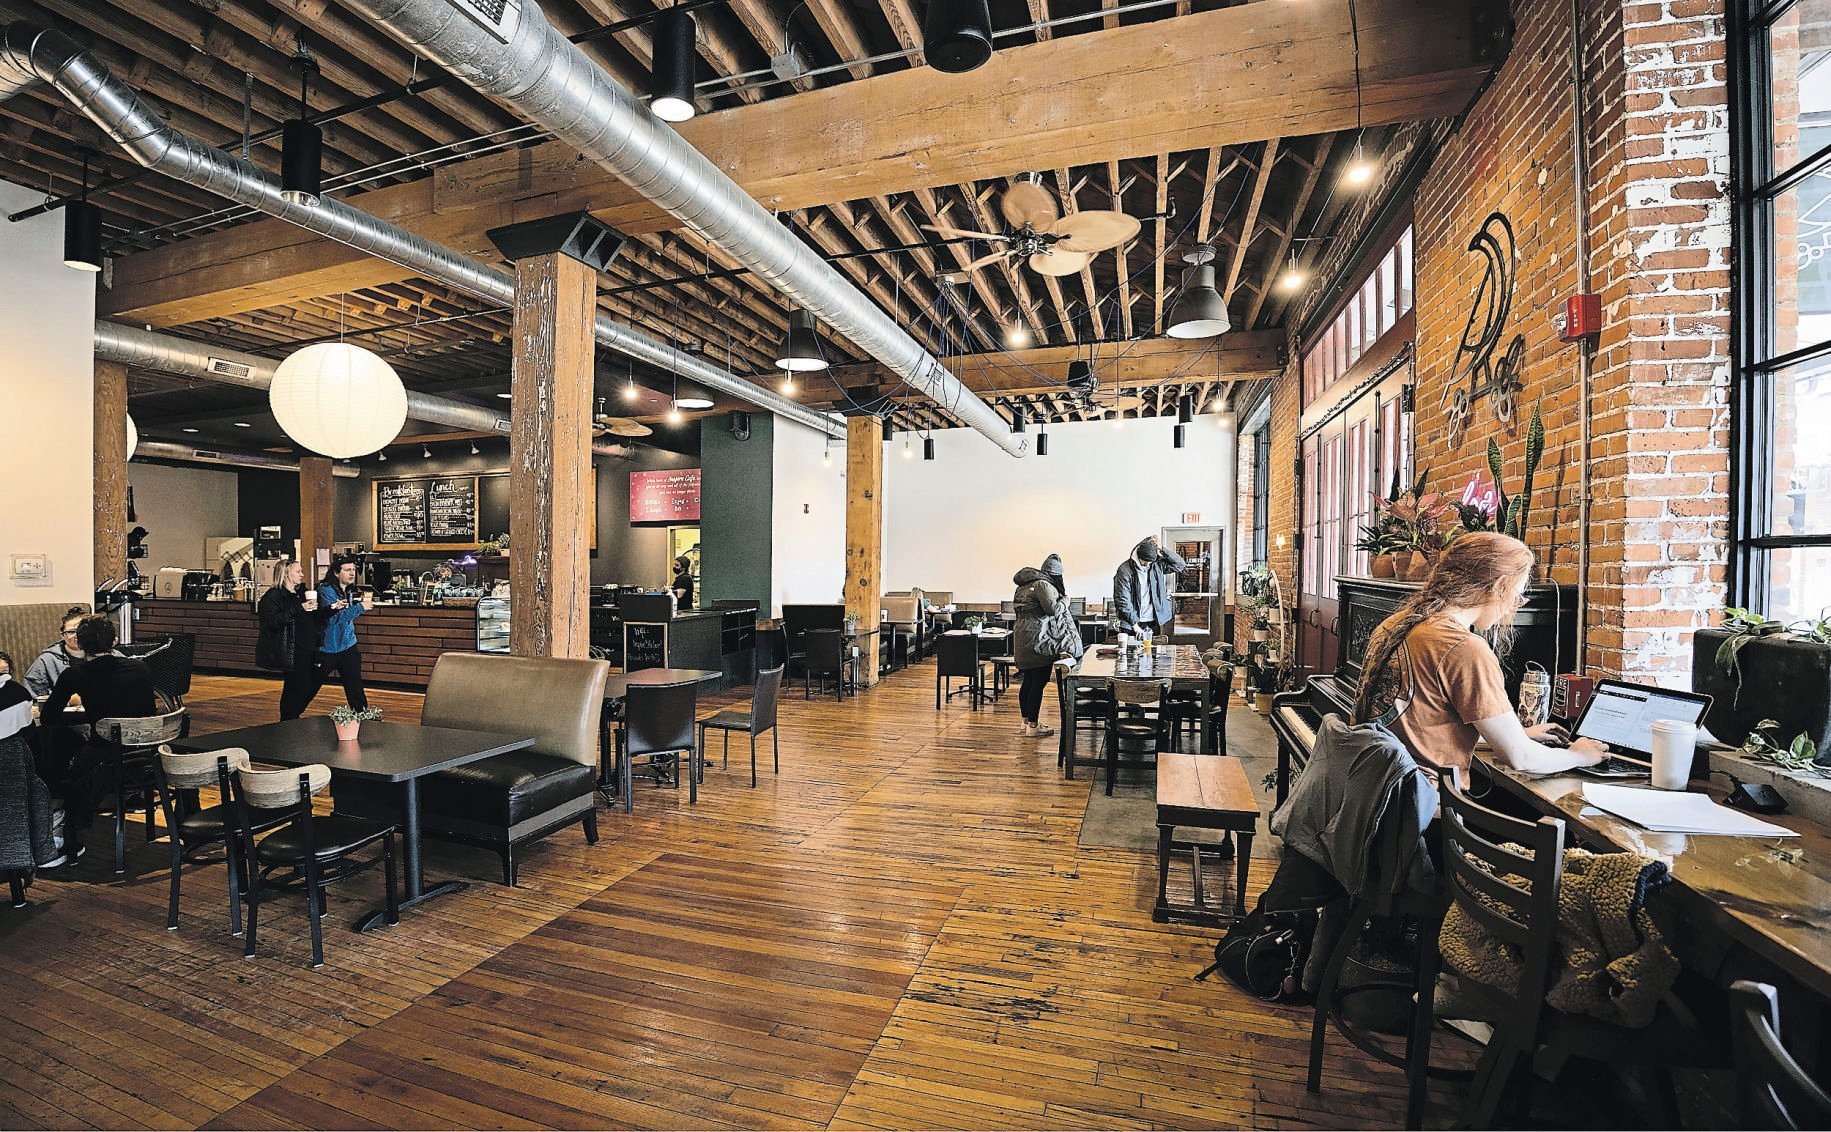 The interior of Wayfarer Coffee, one of numerous local shops in Dubuque.    PHOTO CREDIT: Stephen Gassman